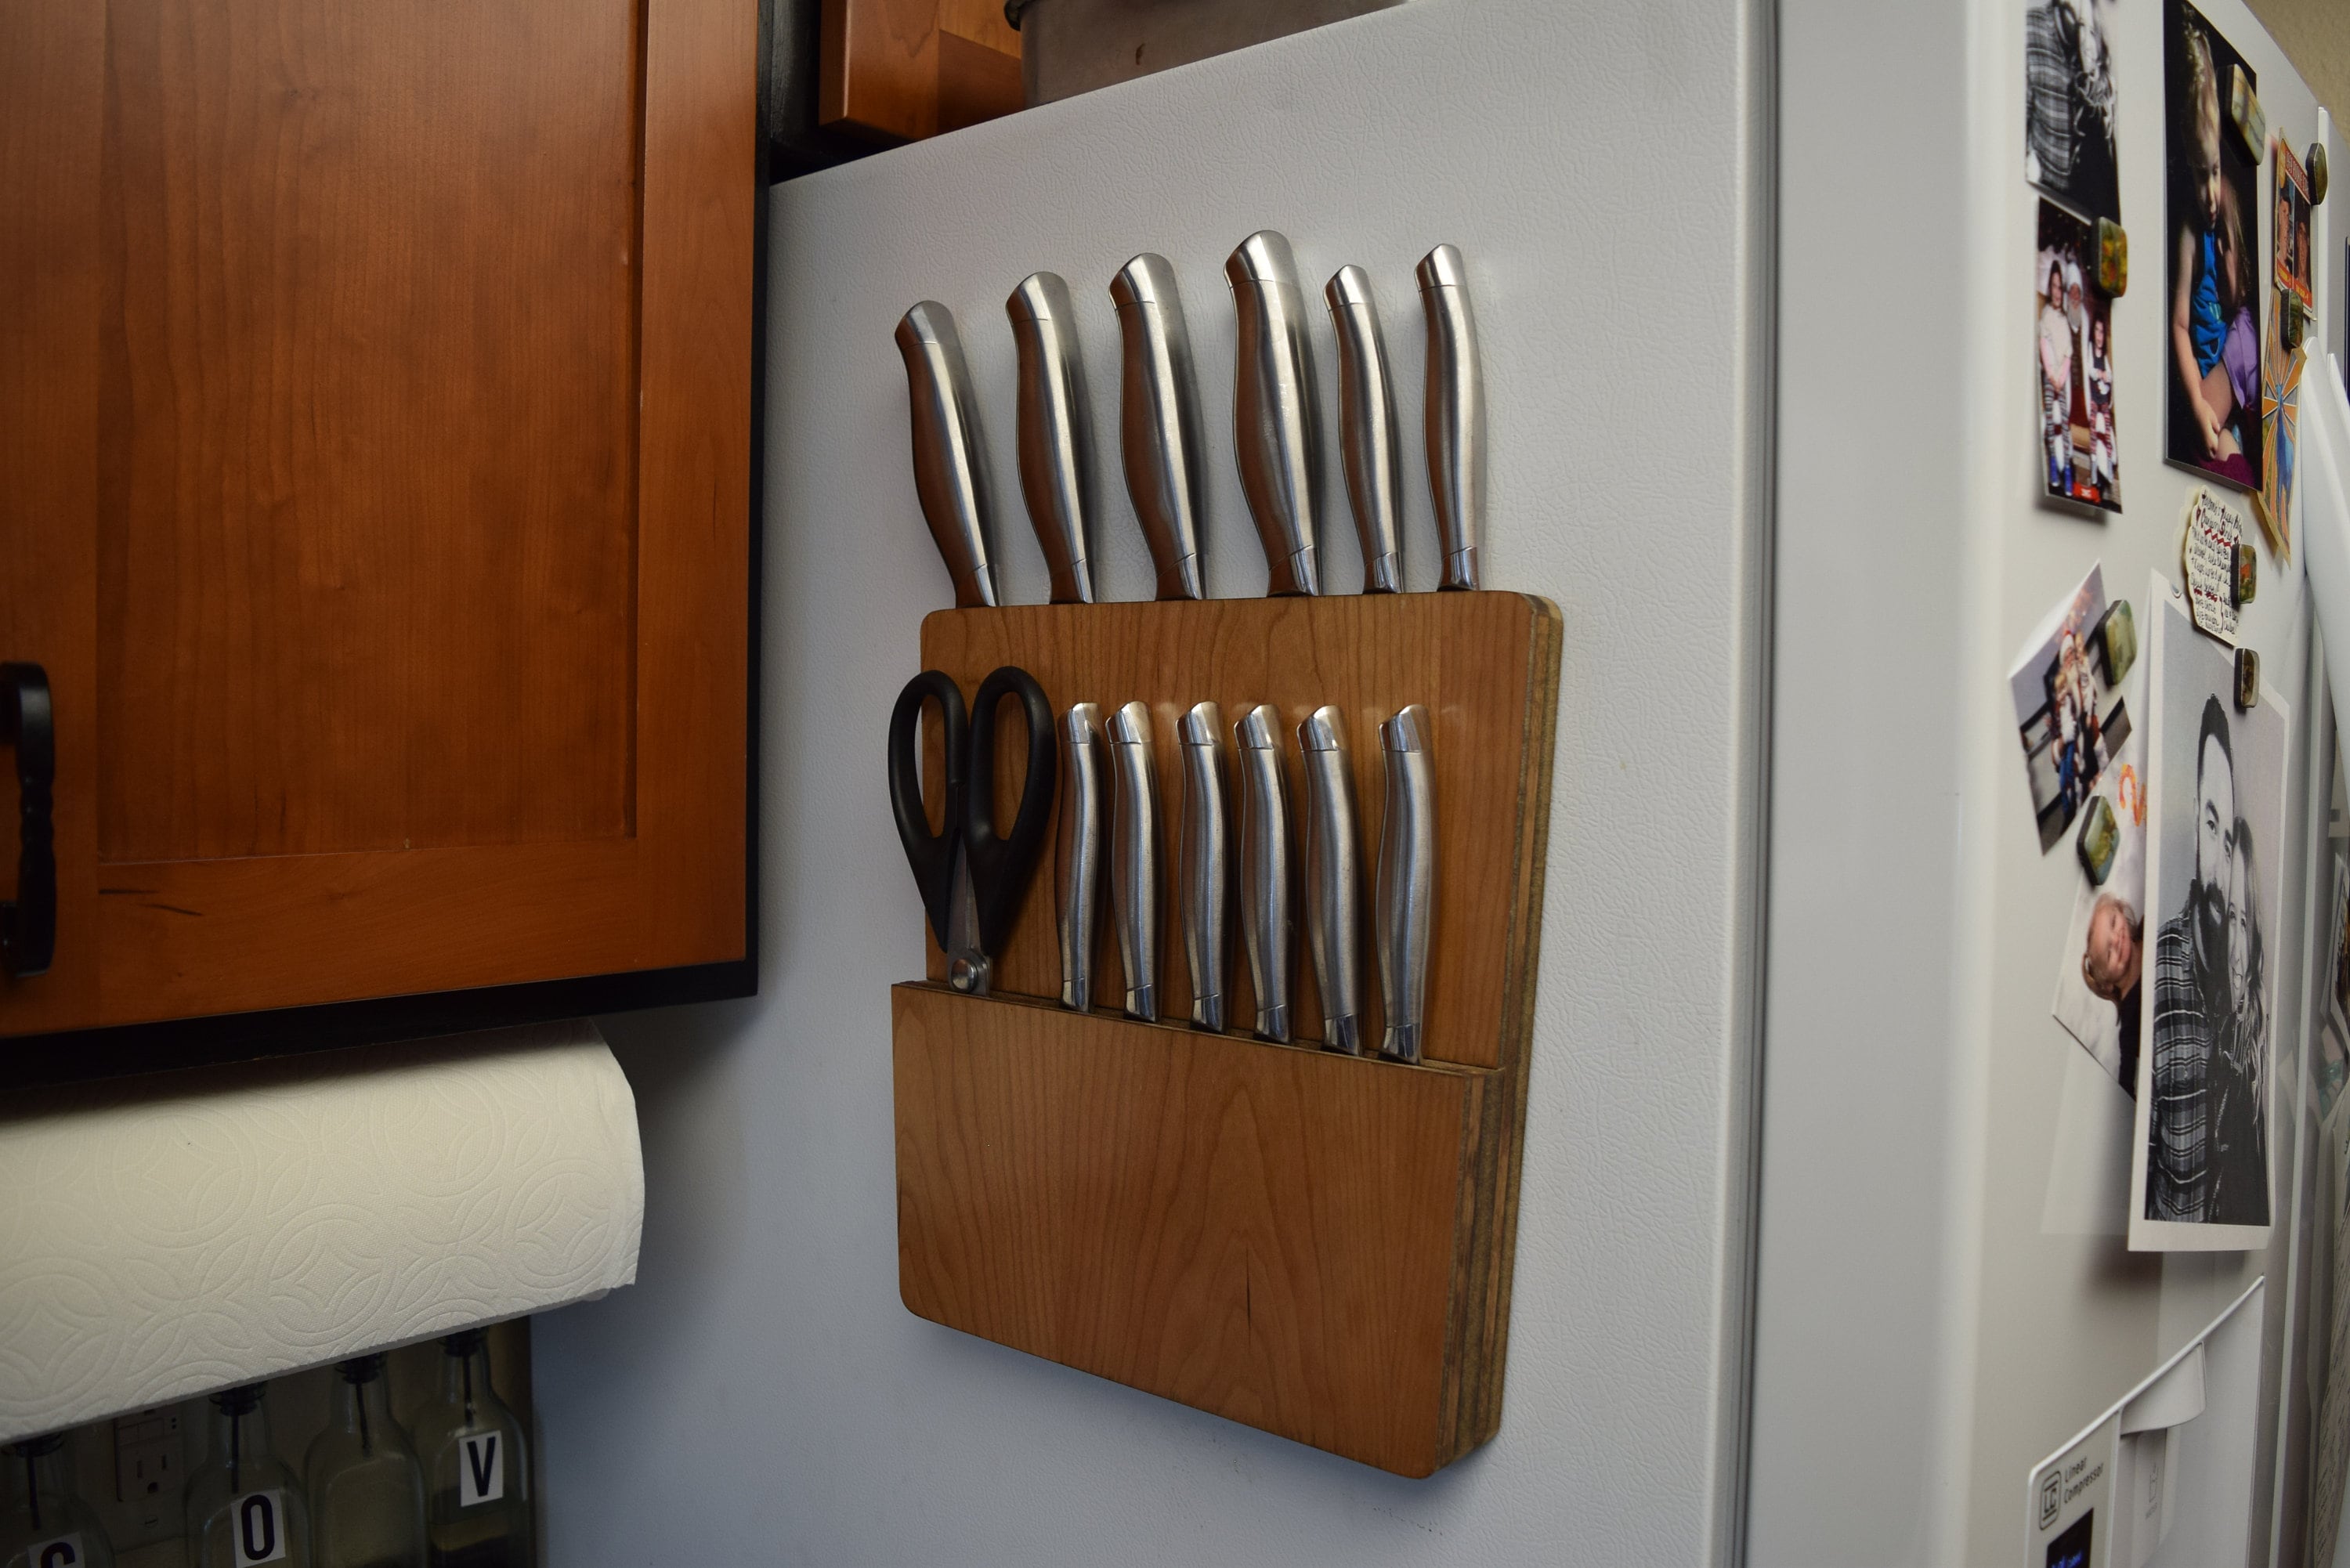 Best Knife Blocks, Docks, and Magnetic Strips to Store Knives